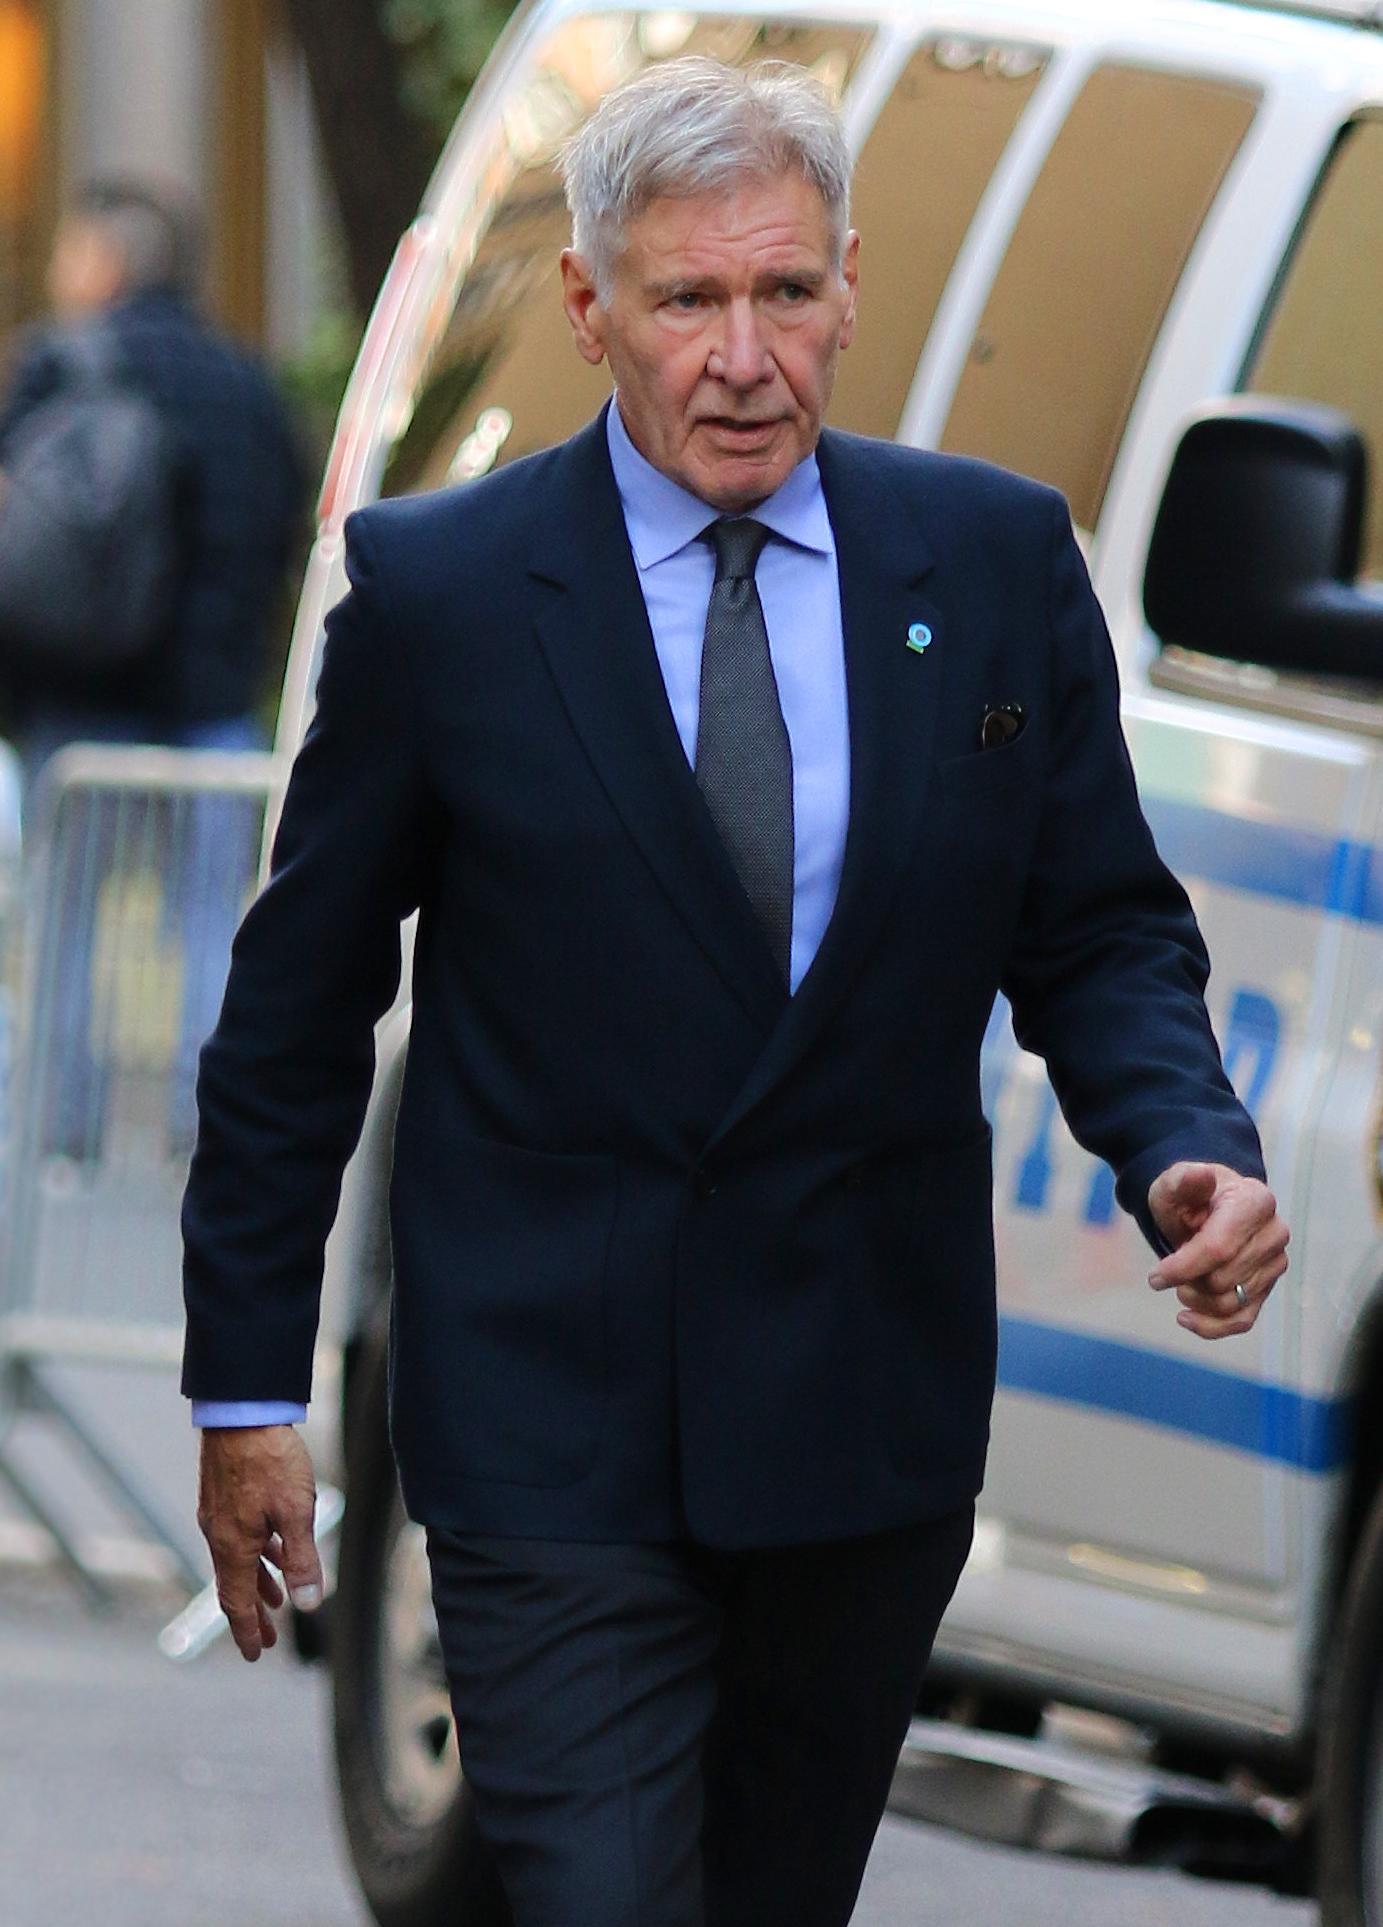 Harrison Ford is denied entry by Homeland Security Police during gridlock streets for UN General Assembly in NYC